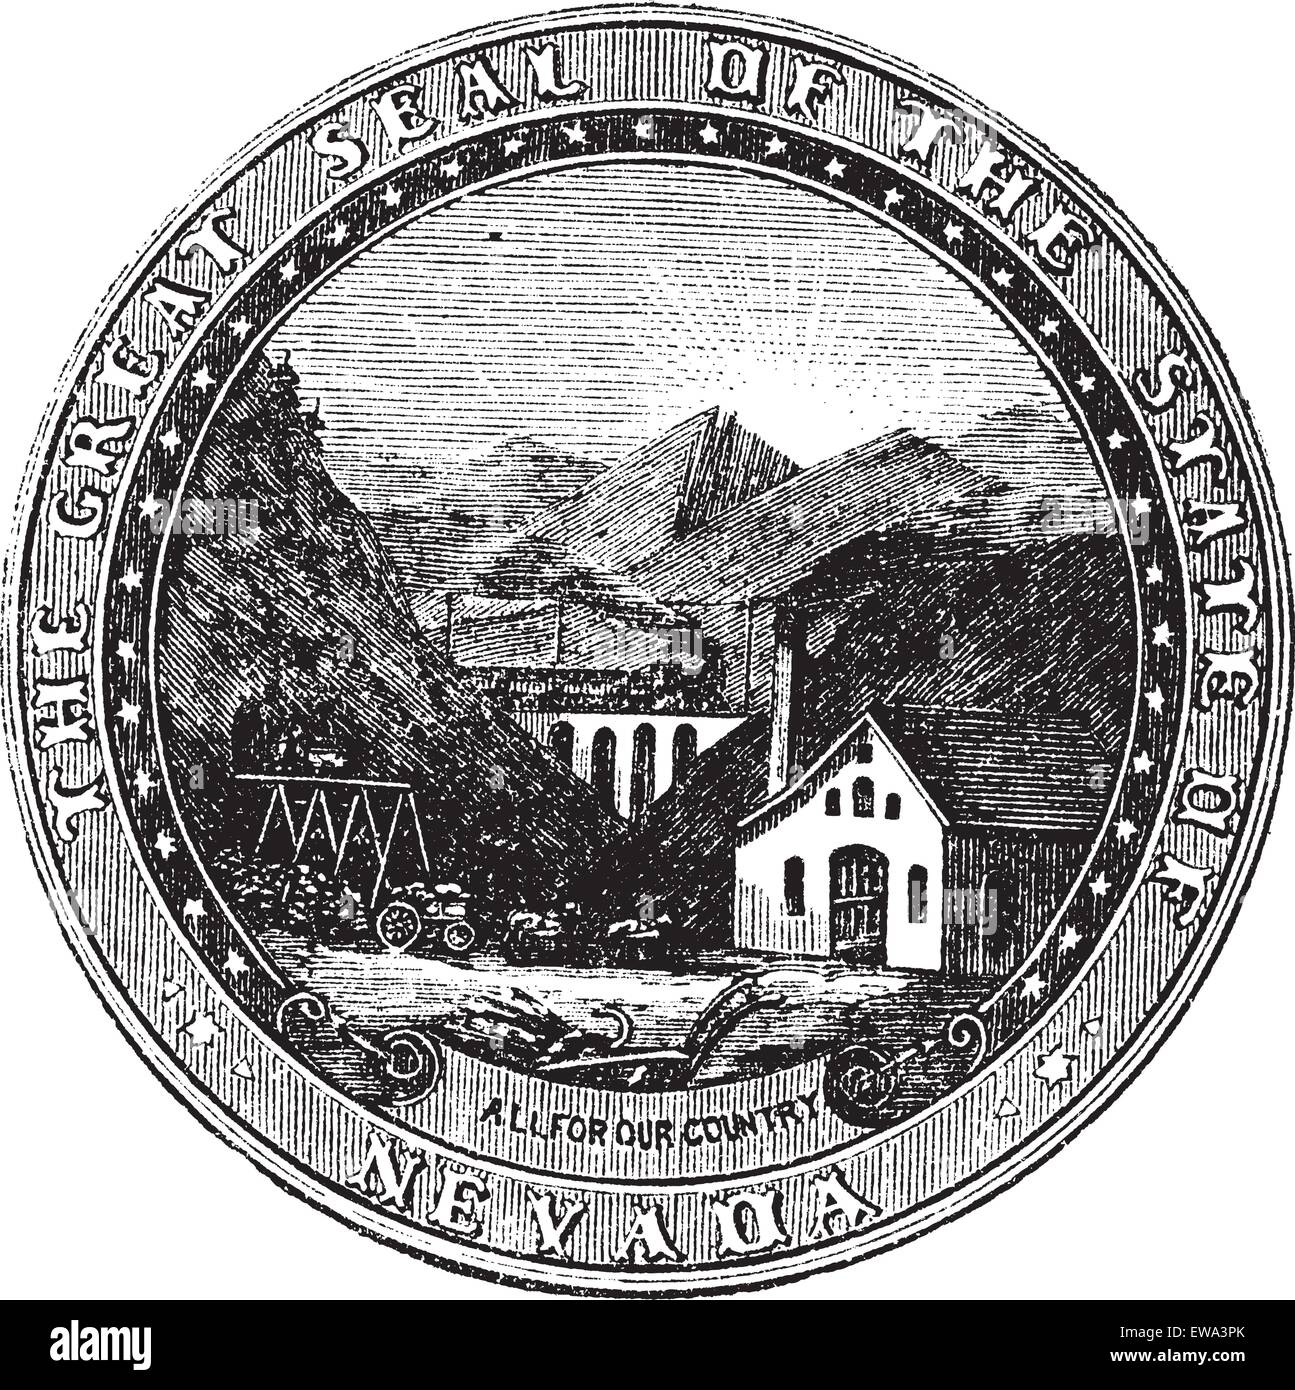 Seal of the State of Nevada, vintage engraved illustration. Trousset encyclopedia (1886 - 1891). Stock Vector